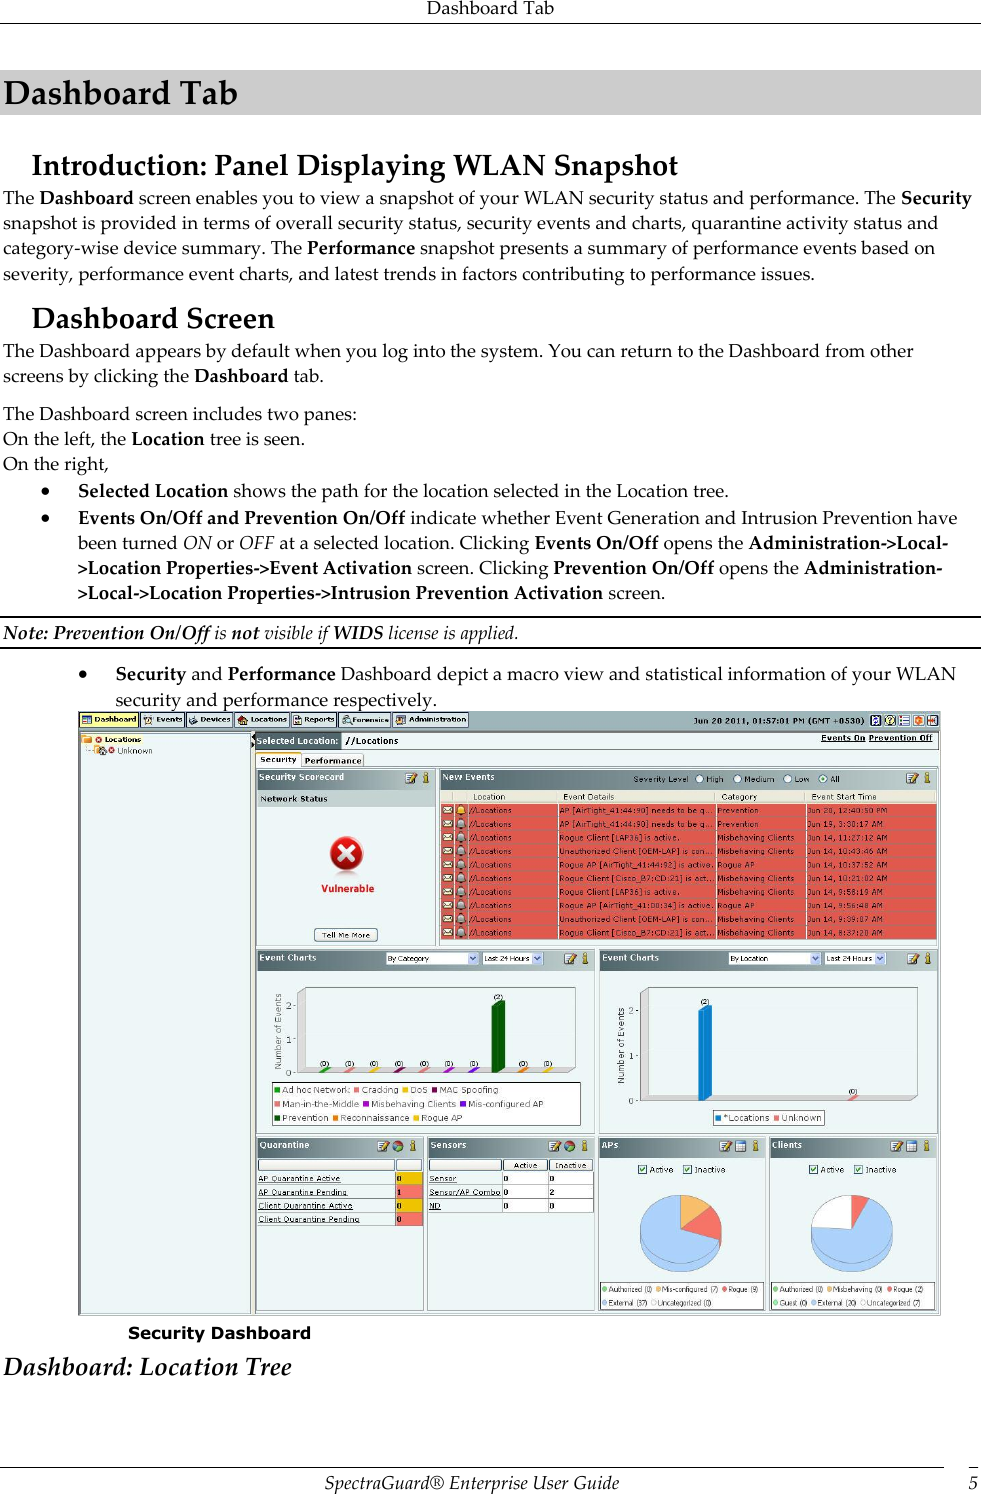 Dashboard Tab SpectraGuard®  Enterprise User Guide 5 Dashboard Tab Introduction: Panel Displaying WLAN Snapshot The Dashboard screen enables you to view a snapshot of your WLAN security status and performance. The Security snapshot is provided in terms of overall security status, security events and charts, quarantine activity status and category-wise device summary. The Performance snapshot presents a summary of performance events based on severity, performance event charts, and latest trends in factors contributing to performance issues. Dashboard Screen The Dashboard appears by default when you log into the system. You can return to the Dashboard from other screens by clicking the Dashboard tab. The Dashboard screen includes two panes: On the left, the Location tree is seen. On the right,  Selected Location shows the path for the location selected in the Location tree.  Events On/Off and Prevention On/Off indicate whether Event Generation and Intrusion Prevention have been turned ON or OFF at a selected location. Clicking Events On/Off opens the Administration-&gt;Local-&gt;Location Properties-&gt;Event Activation screen. Clicking Prevention On/Off opens the Administration-&gt;Local-&gt;Location Properties-&gt;Intrusion Prevention Activation screen. Note: Prevention On/Off is not visible if WIDS license is applied.  Security and Performance Dashboard depict a macro view and statistical information of your WLAN security and performance respectively.  Security Dashboard Dashboard: Location Tree 